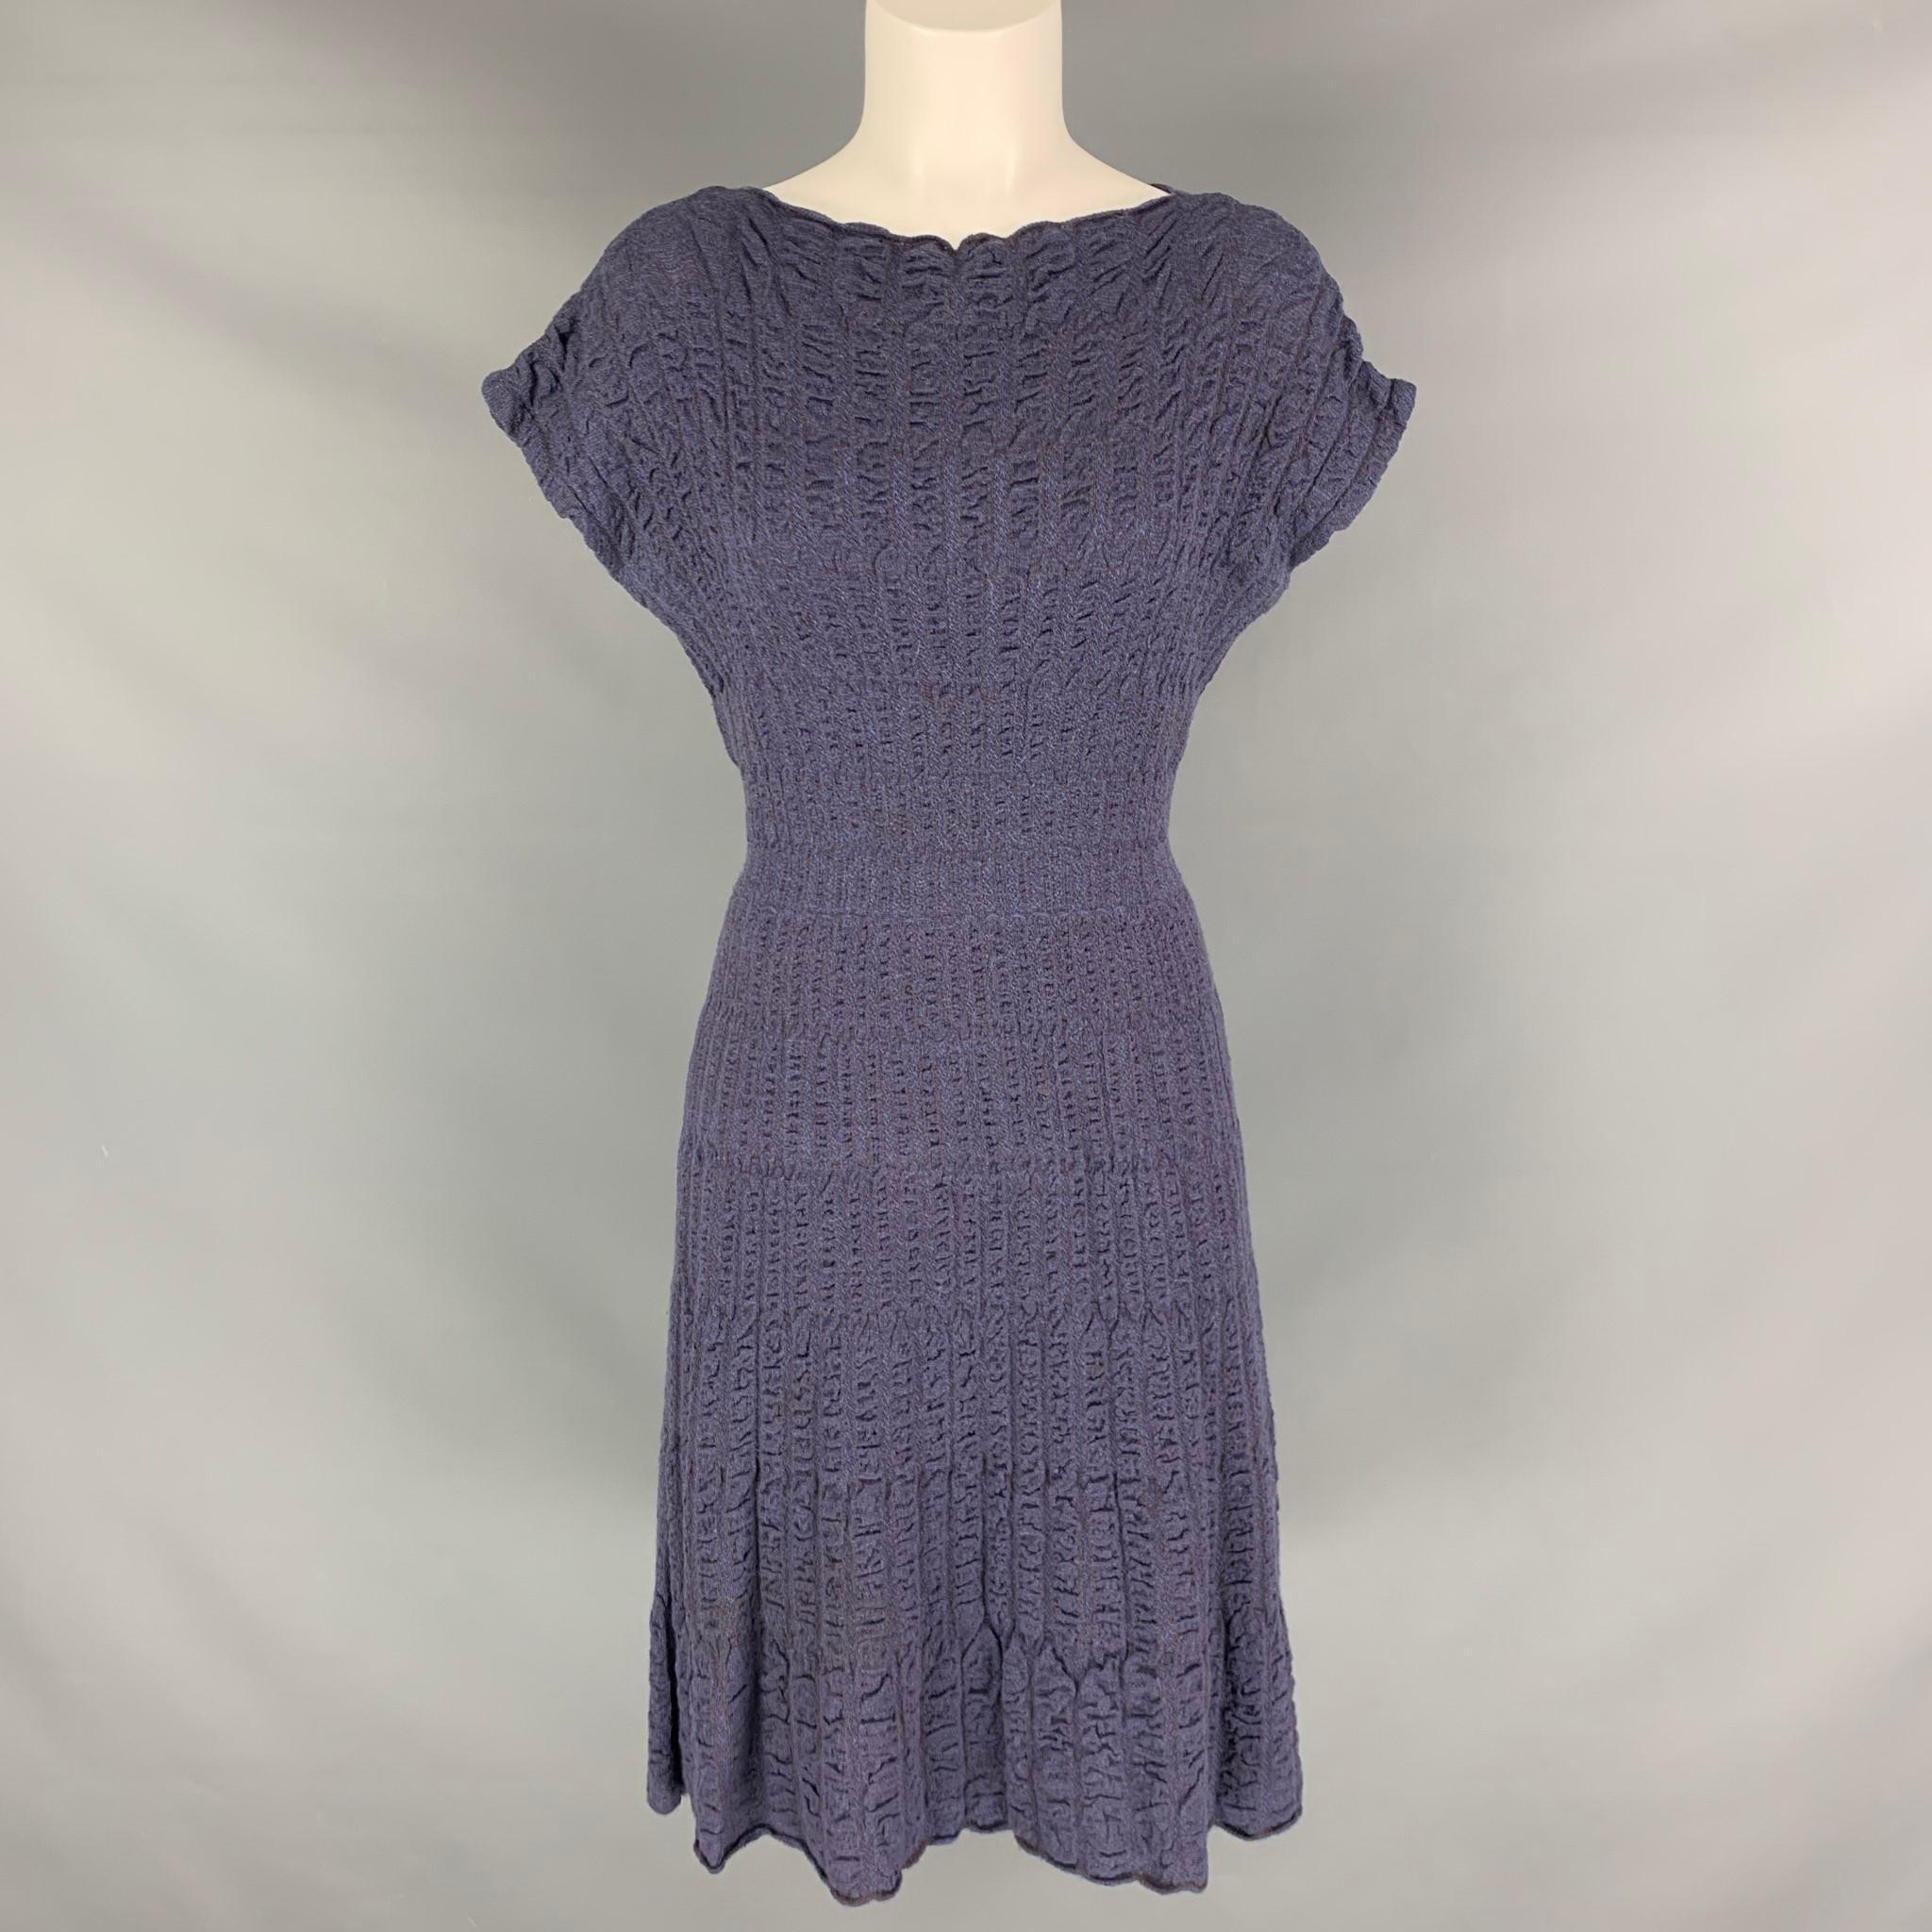 MISSONI dress comes in a purple merino wool blend knit material featuring an A-line style, cap sleeves, striped texture. Made in Italy.

Excellent Pre-Owned Condition.
Marked: 44

Measurements:

Shoulder:316 in.
Bust:34 in.
Waist: 26 in.
Hip: 36